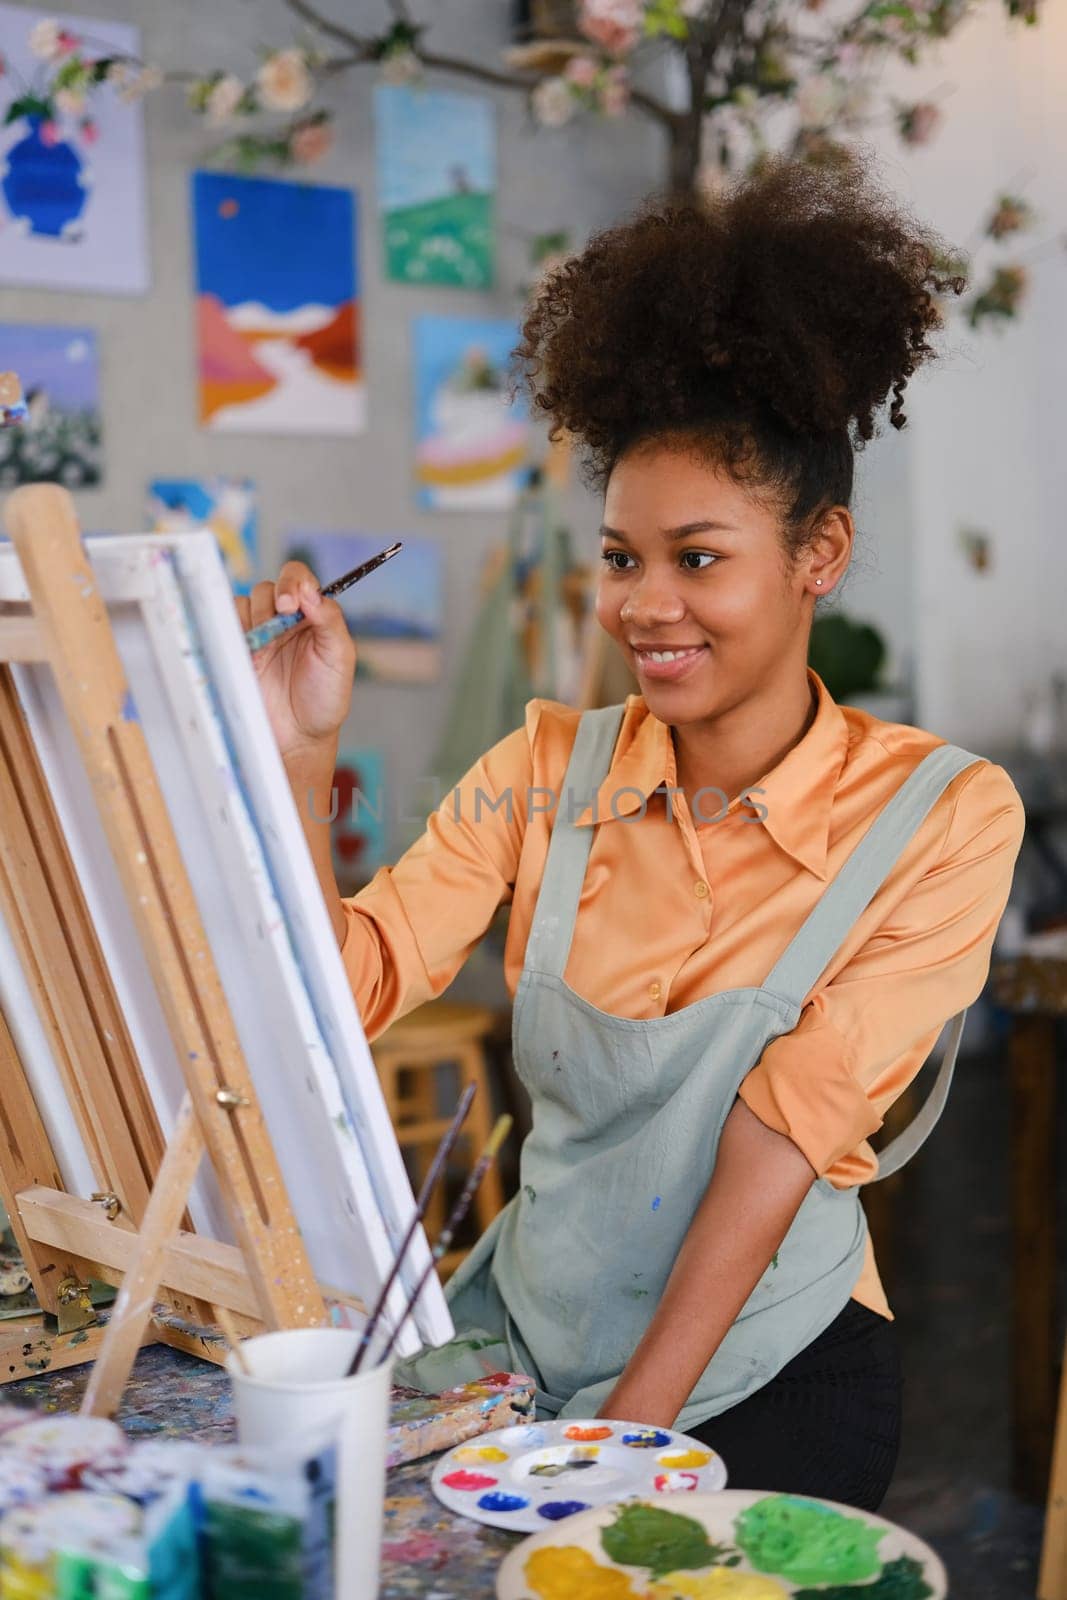 Portrait of cheerful student girl painting on canvas in art classroom. Art, creative learning and leisure activity concept.